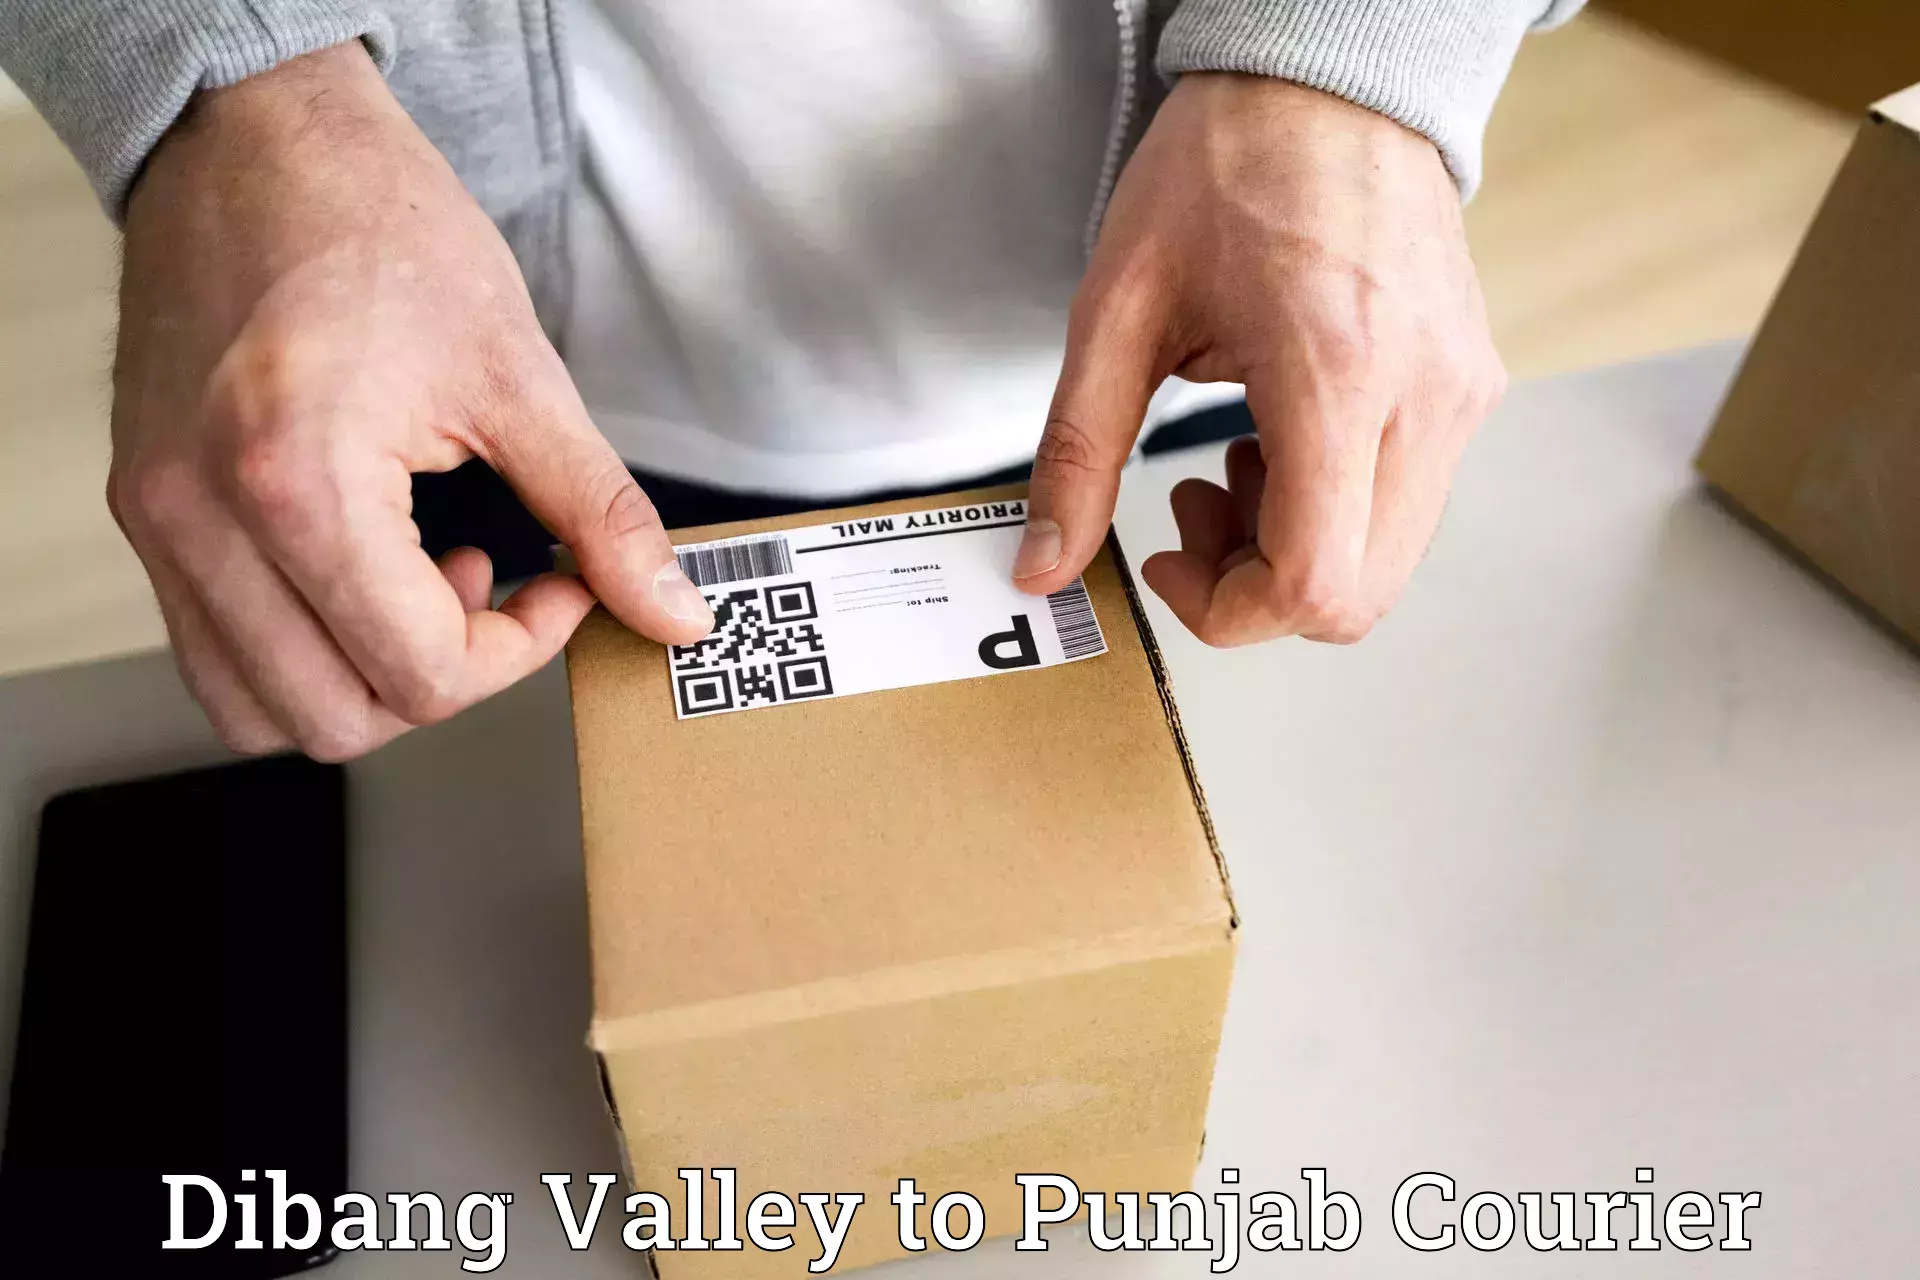 Reliable logistics providers Dibang Valley to Mohali